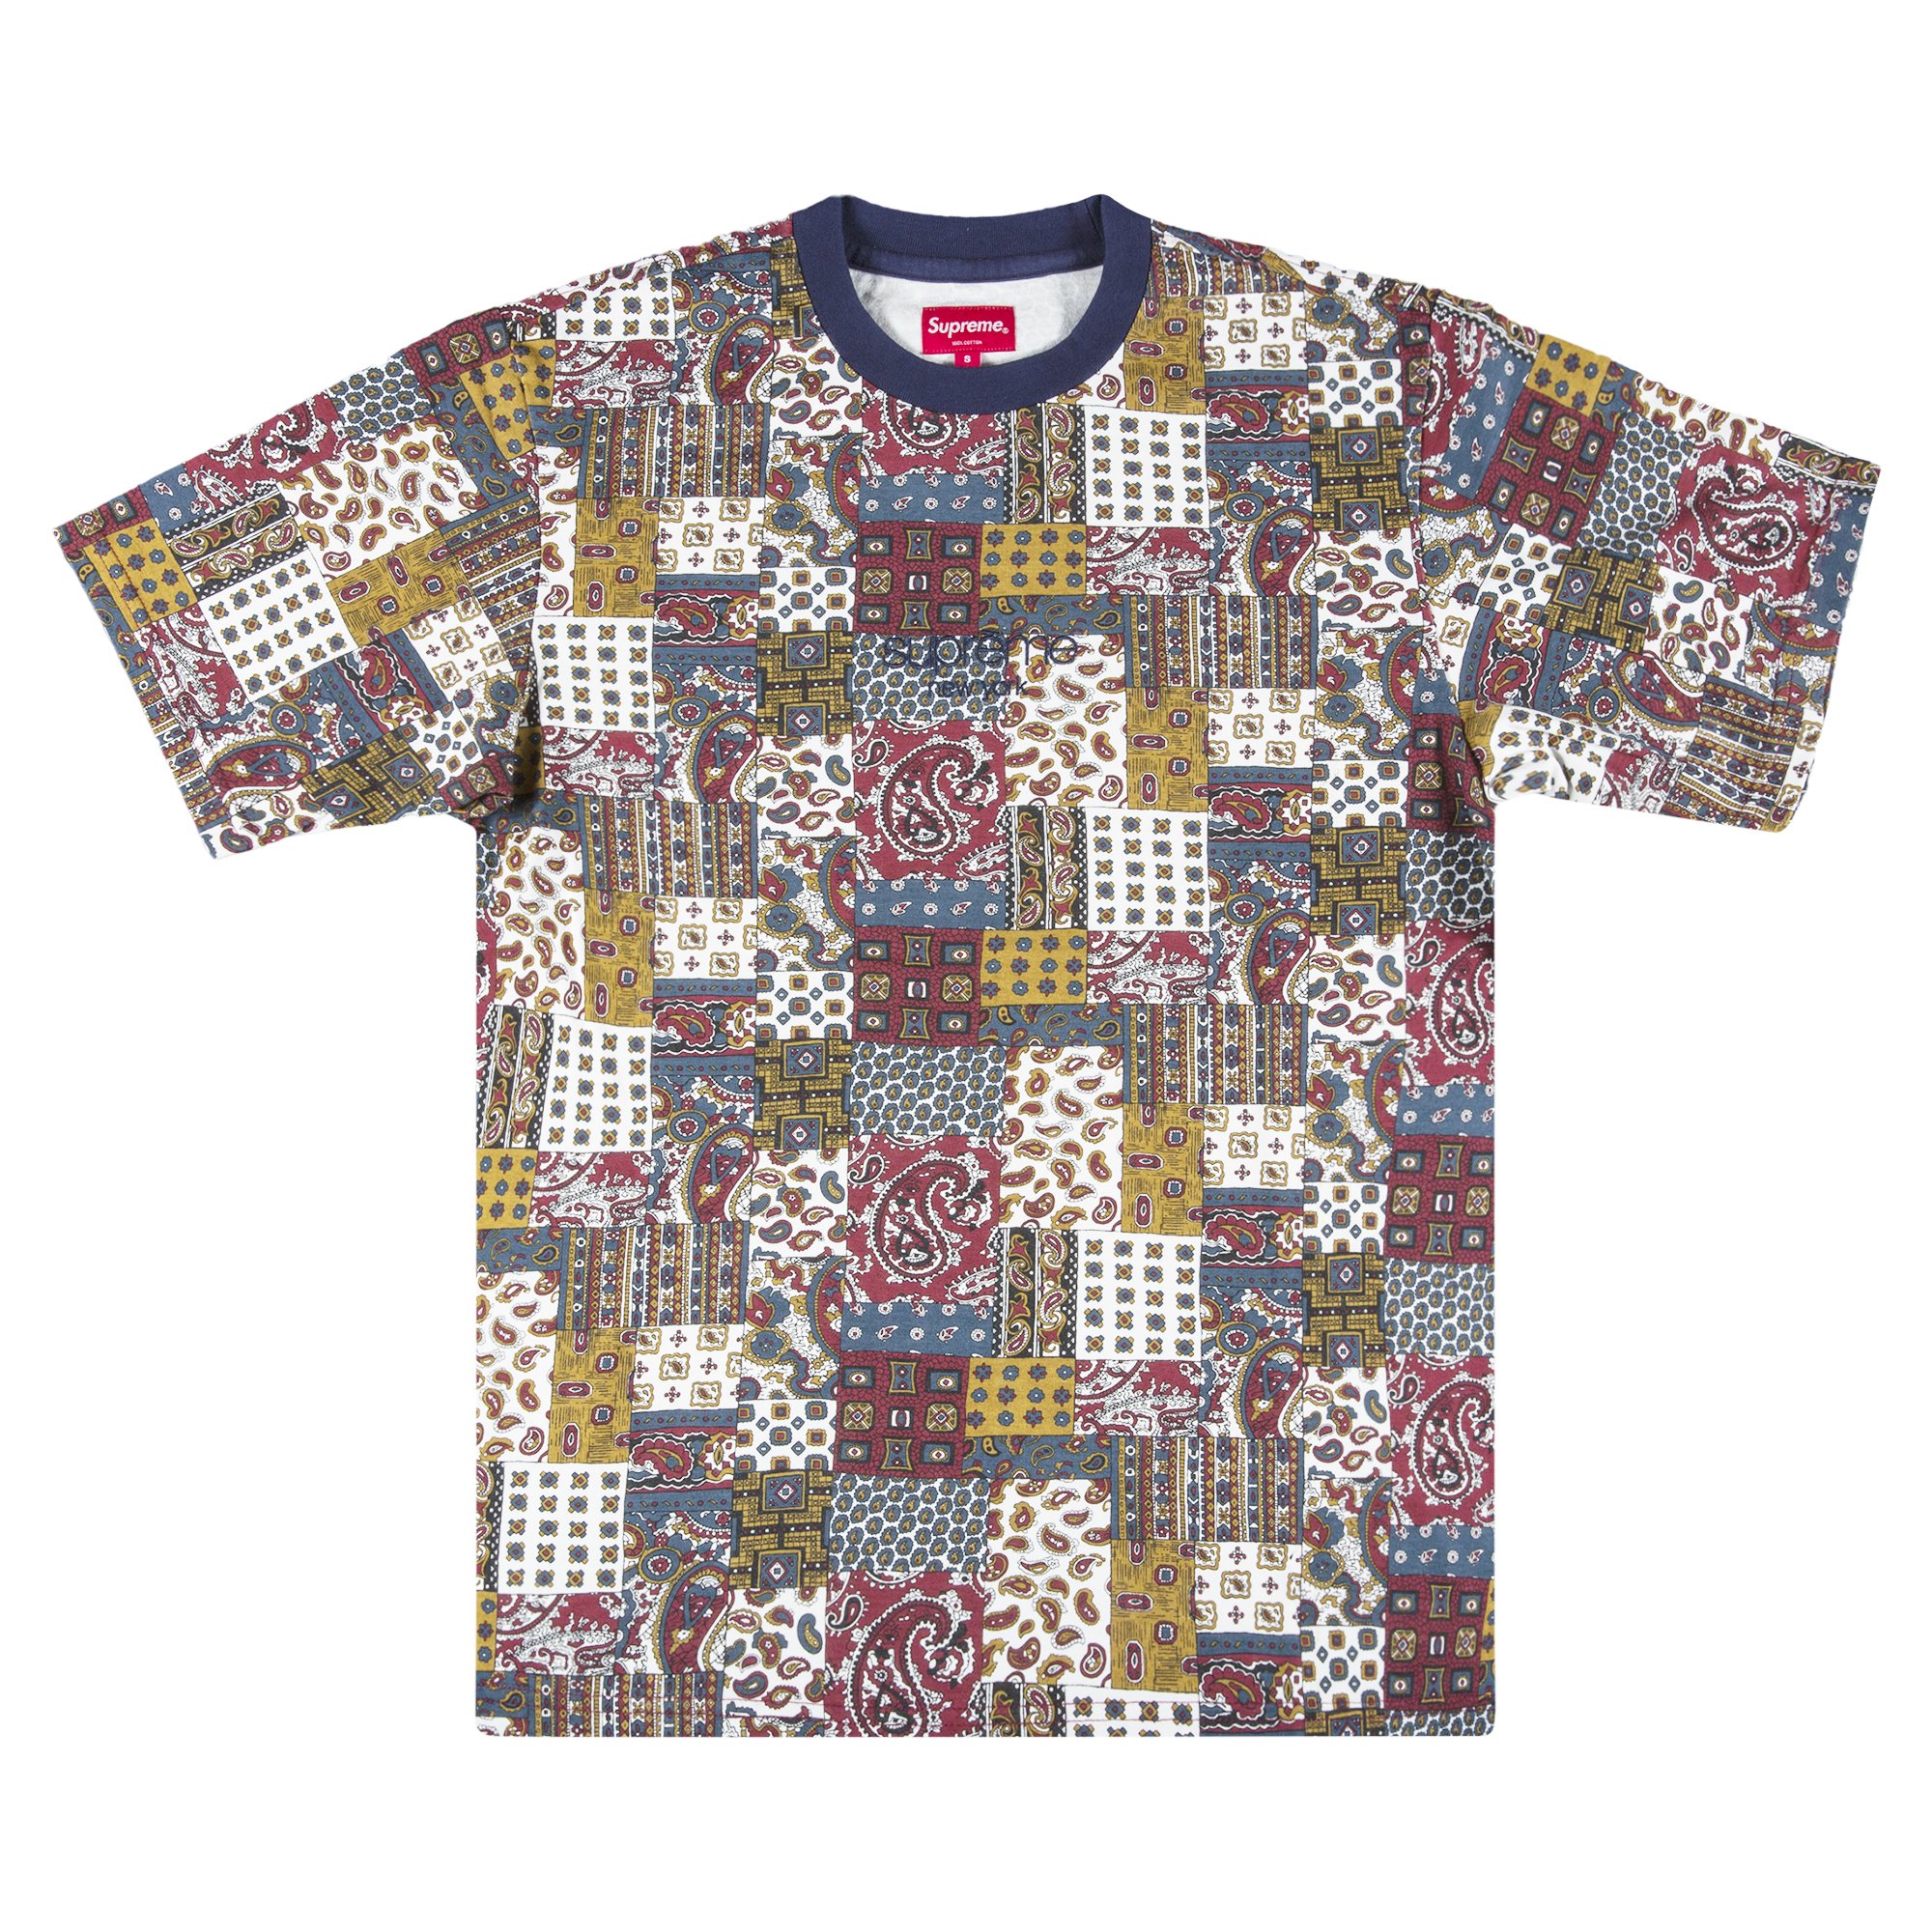 Buy Supreme Patchwork Paisley Short-Sleeve Top 'Red' - SS19KN8 RED